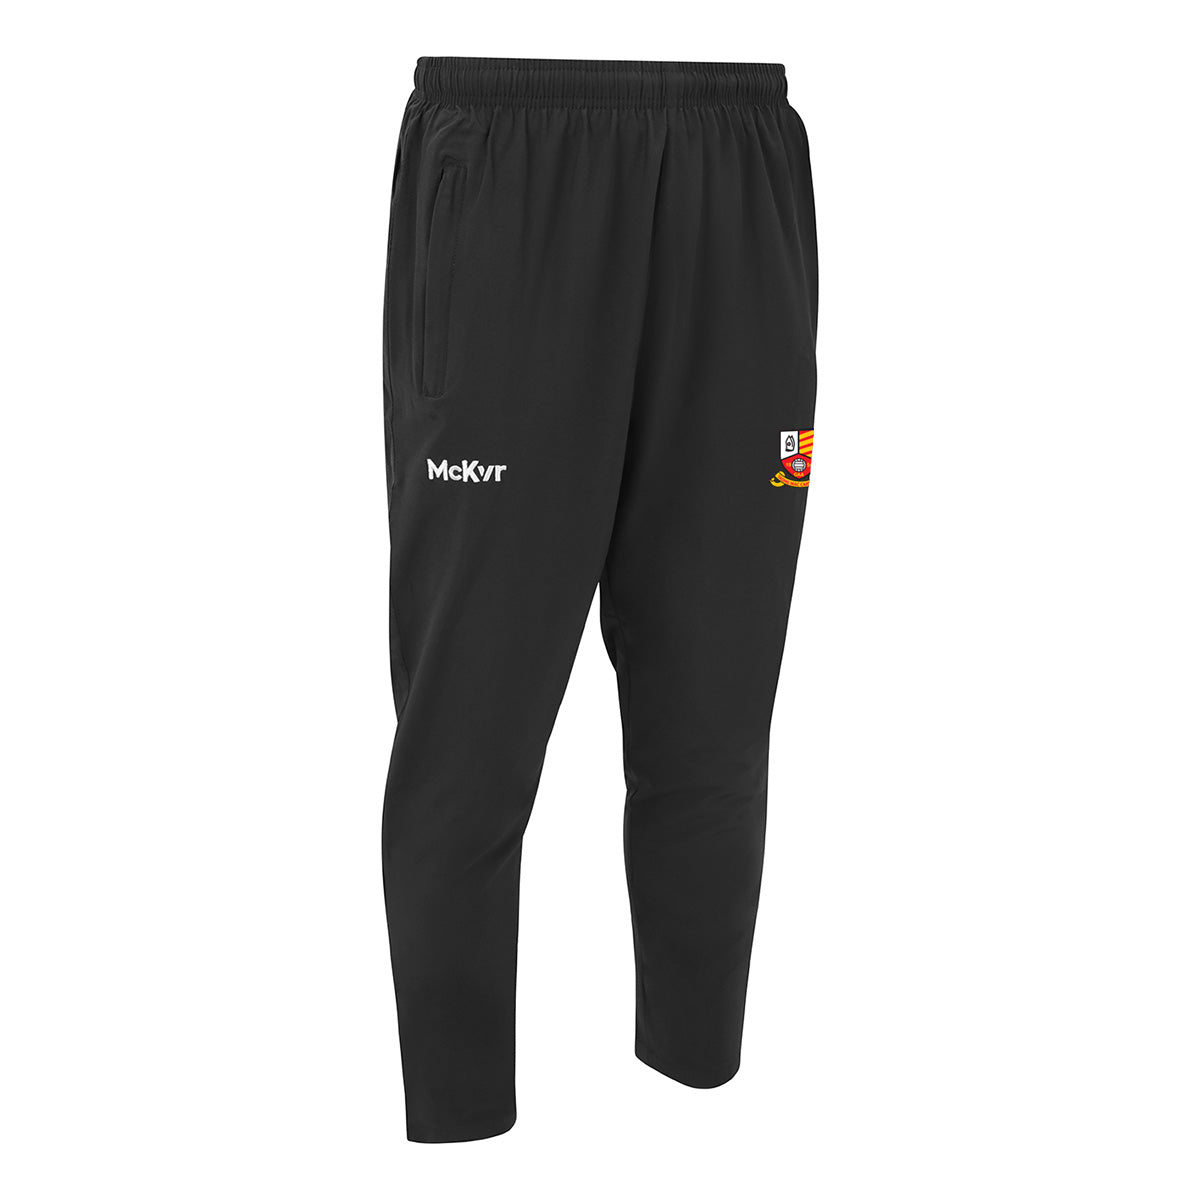 Mc Keever Caheragh Tadgh McCarthy's Core 22 Tapered Pants - Youth - Black